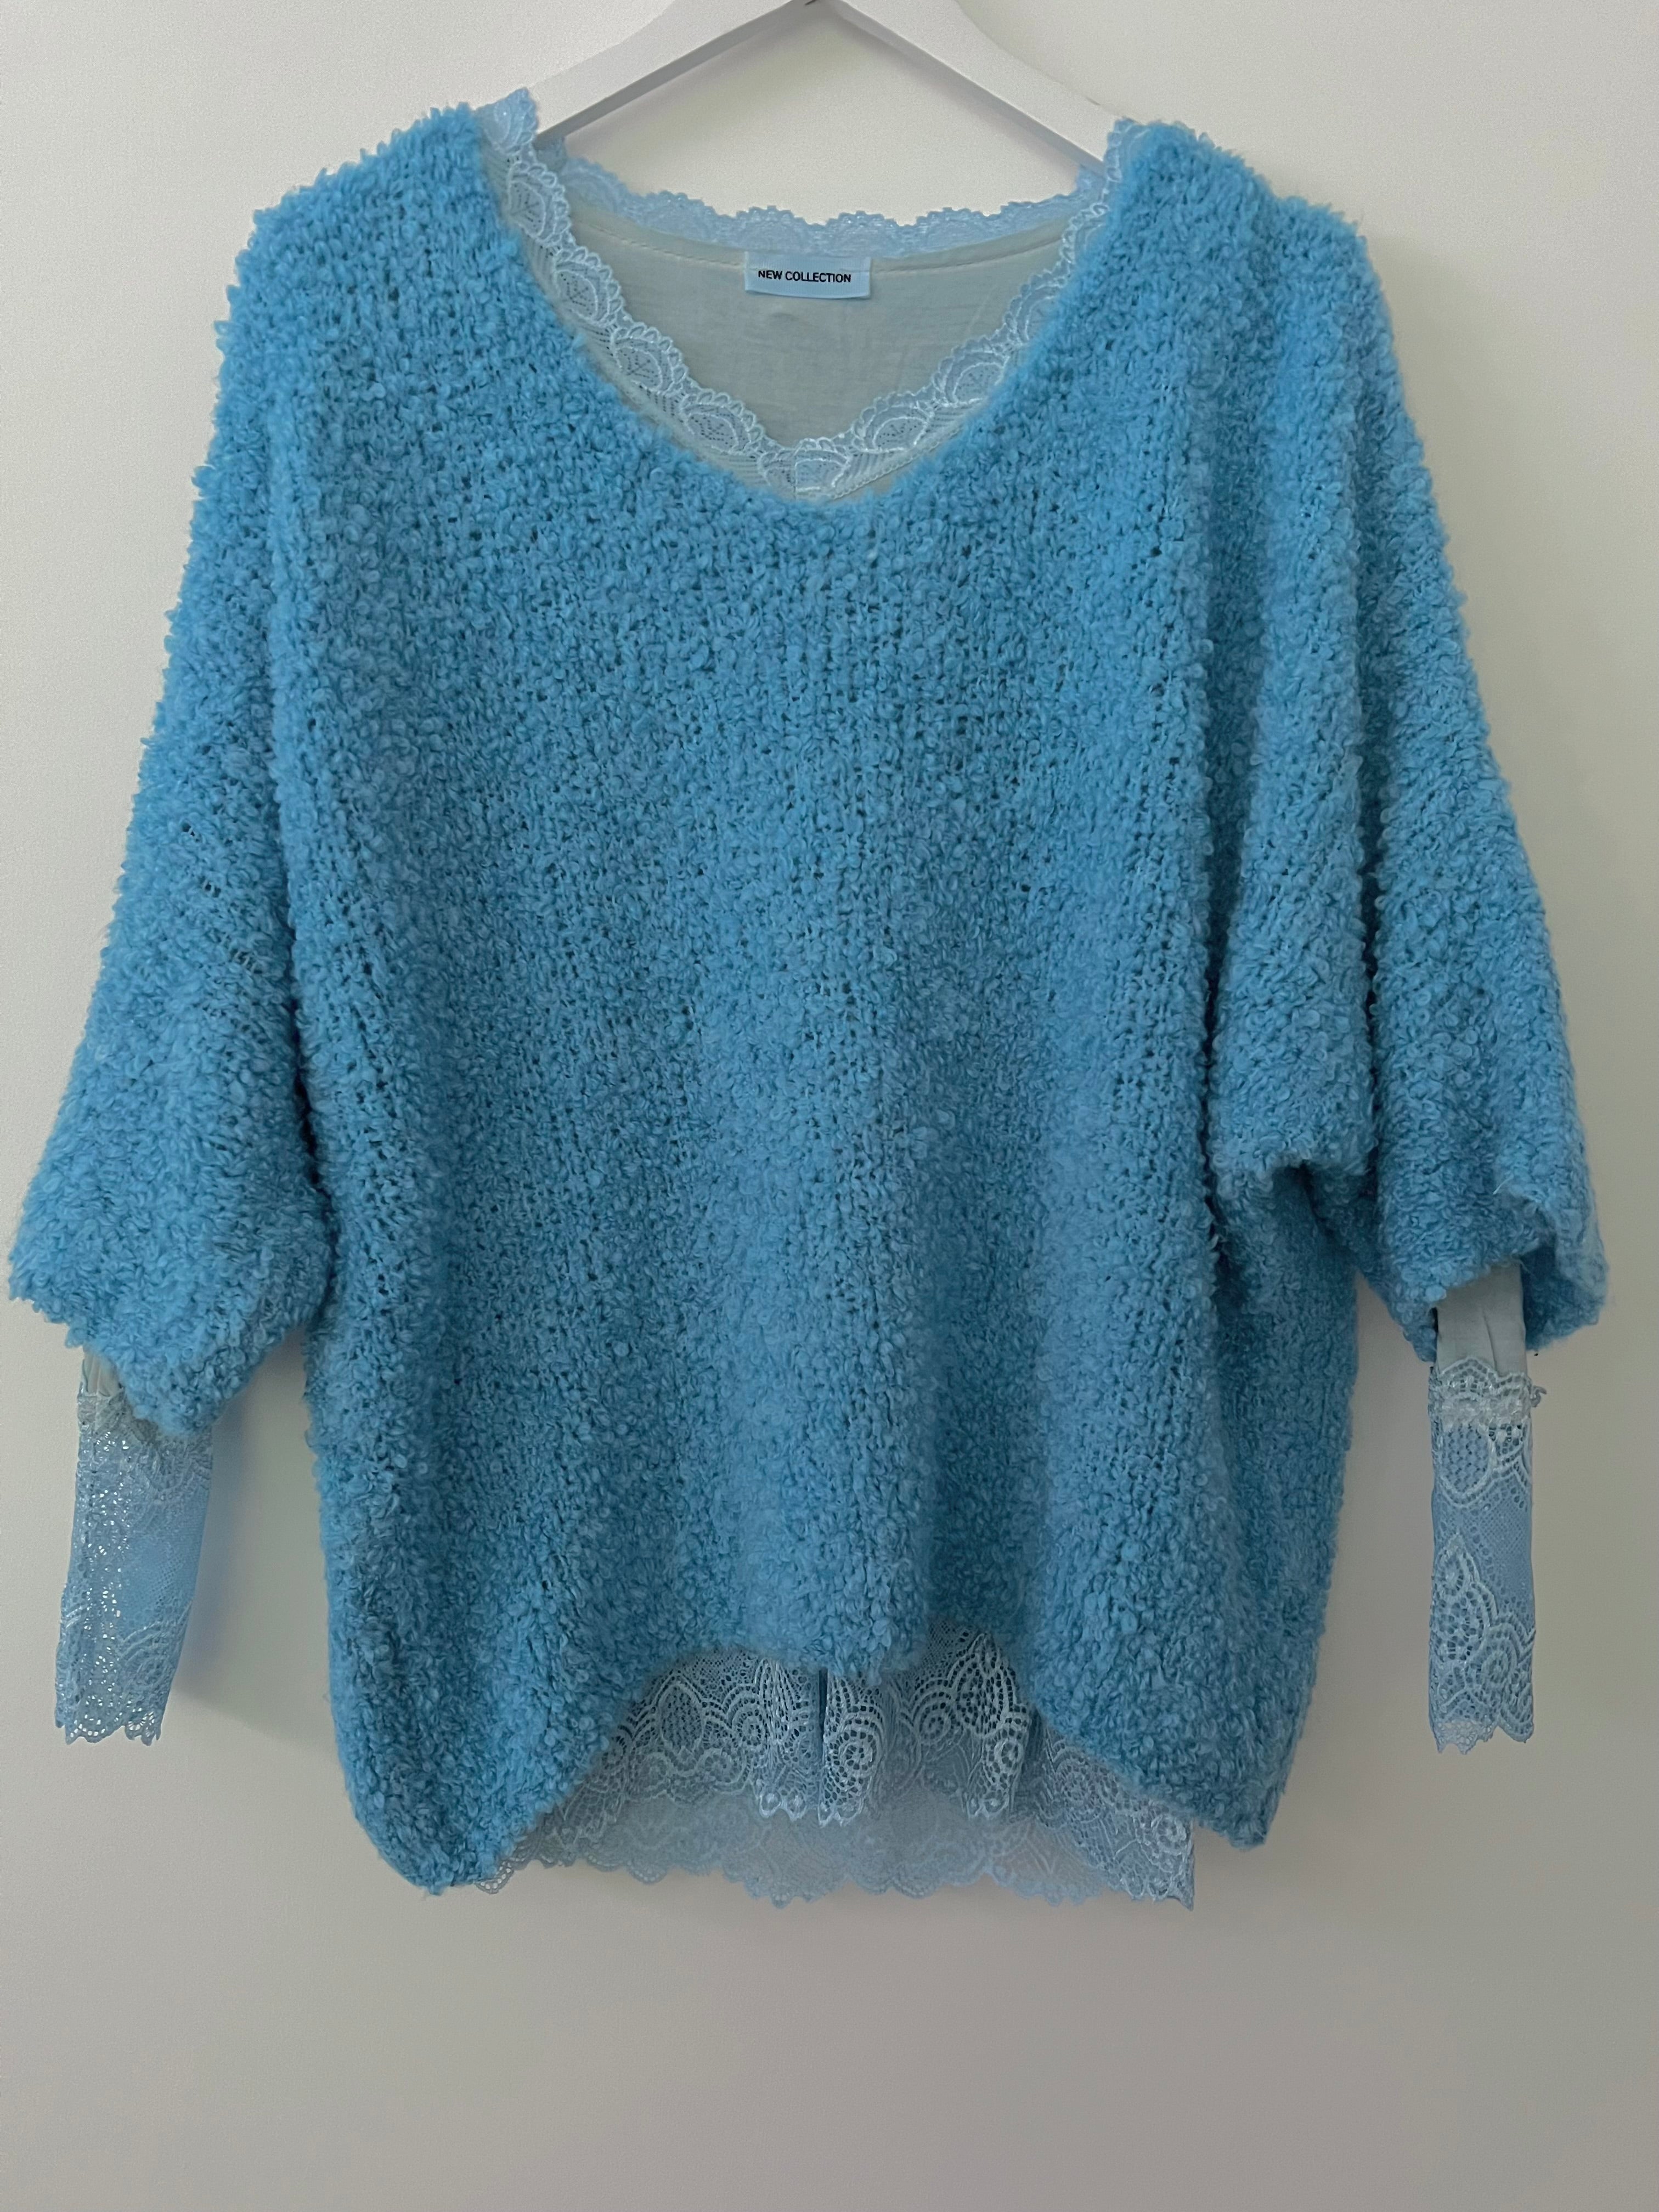 Cropped Sleeve Boucle Knit in Blue